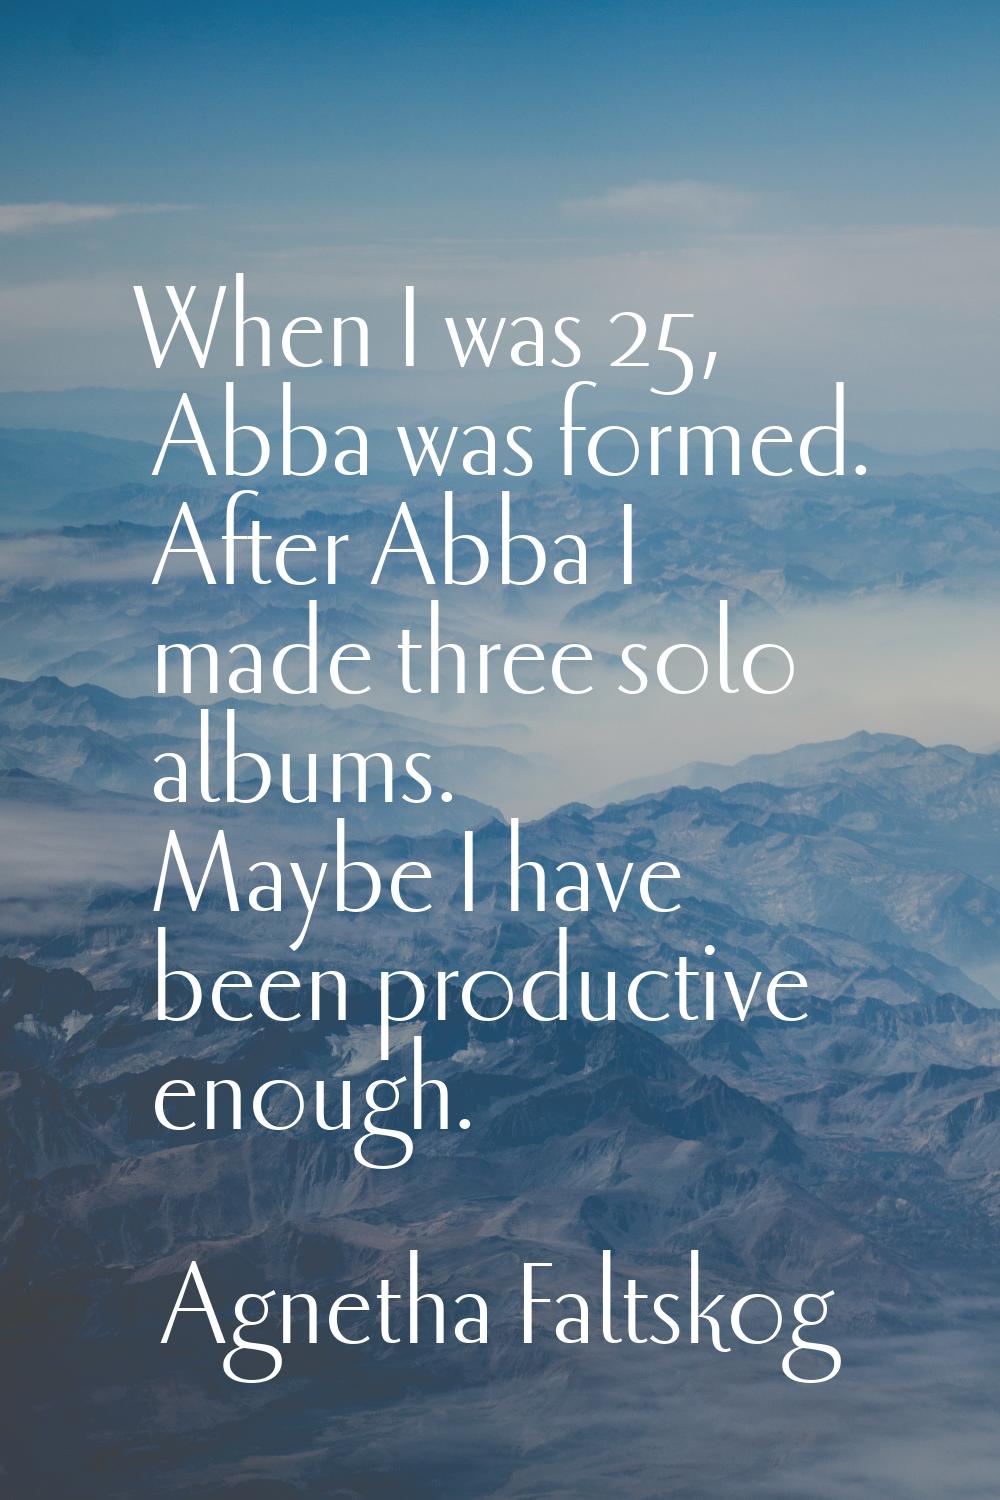 When I was 25, Abba was formed. After Abba I made three solo albums. Maybe I have been productive e